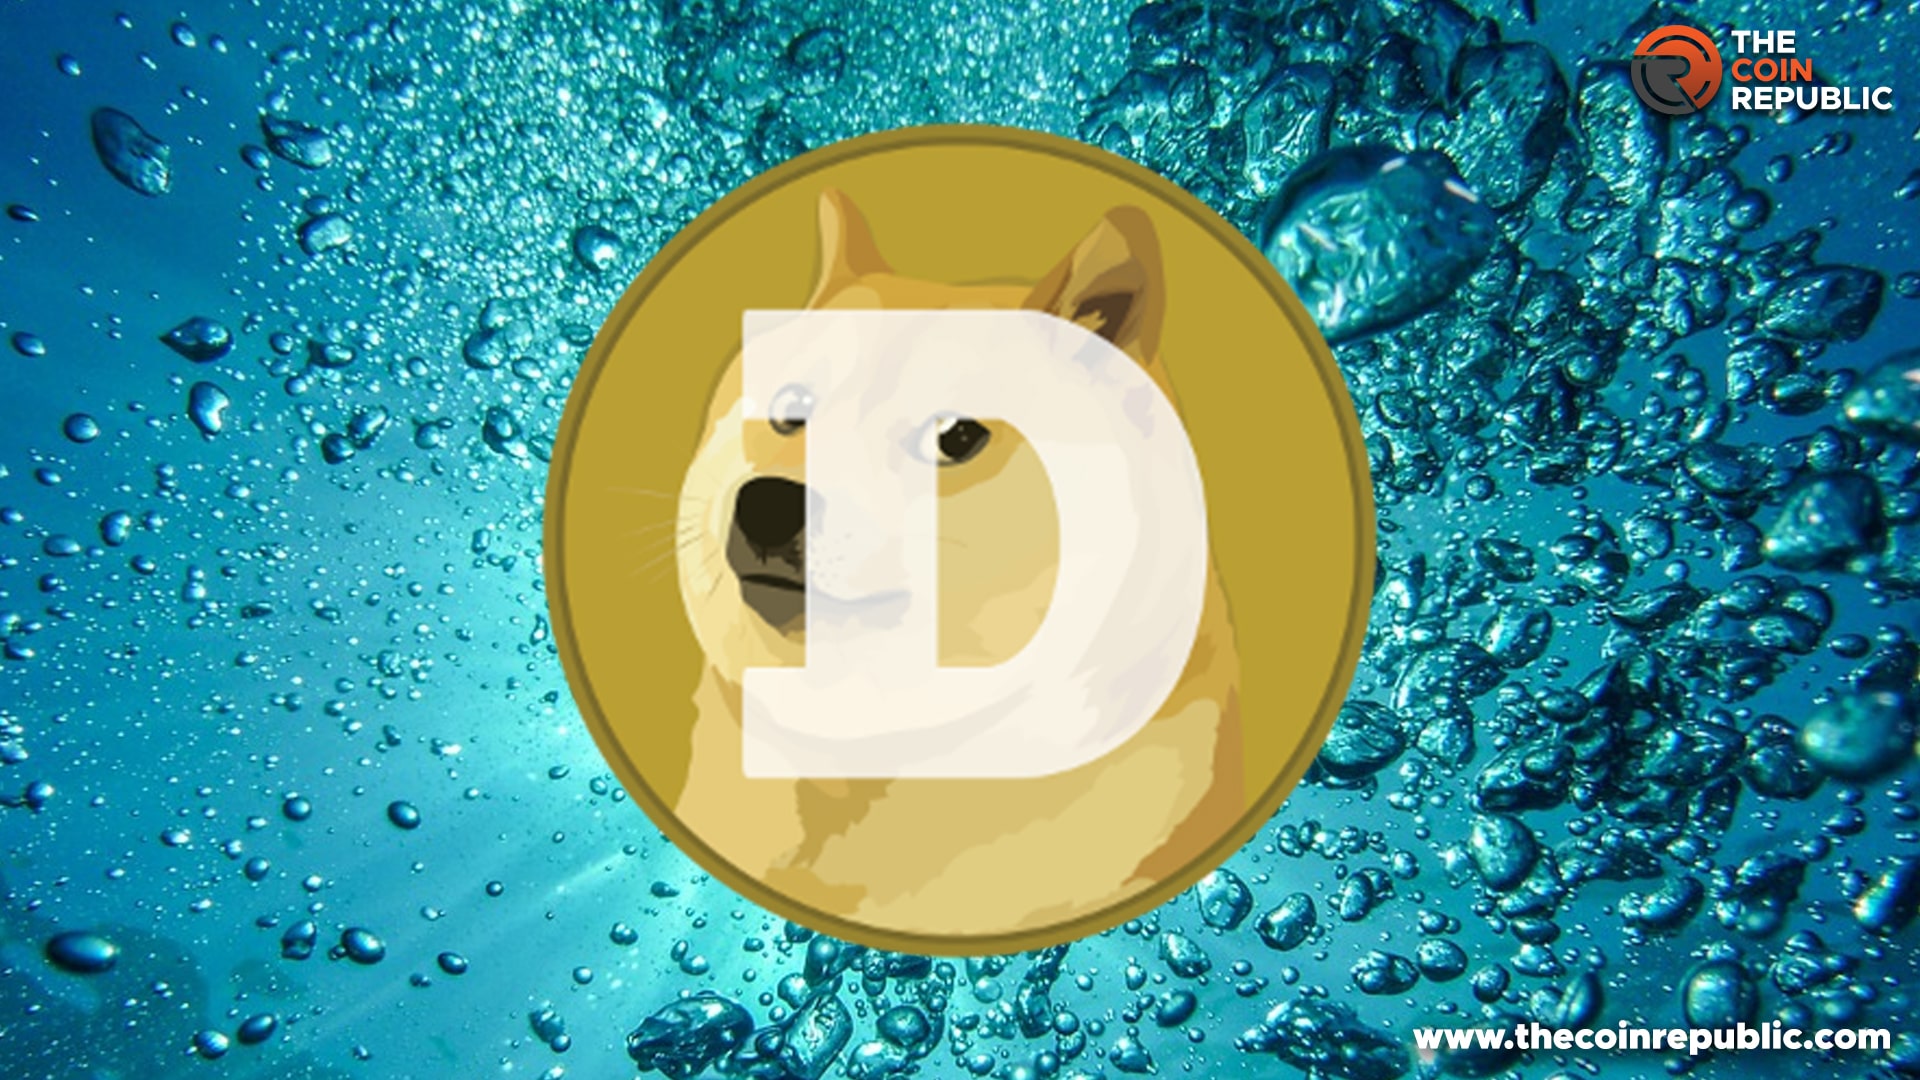 Dogecoin Has The Potential To Be Used As A Cryptocurrency